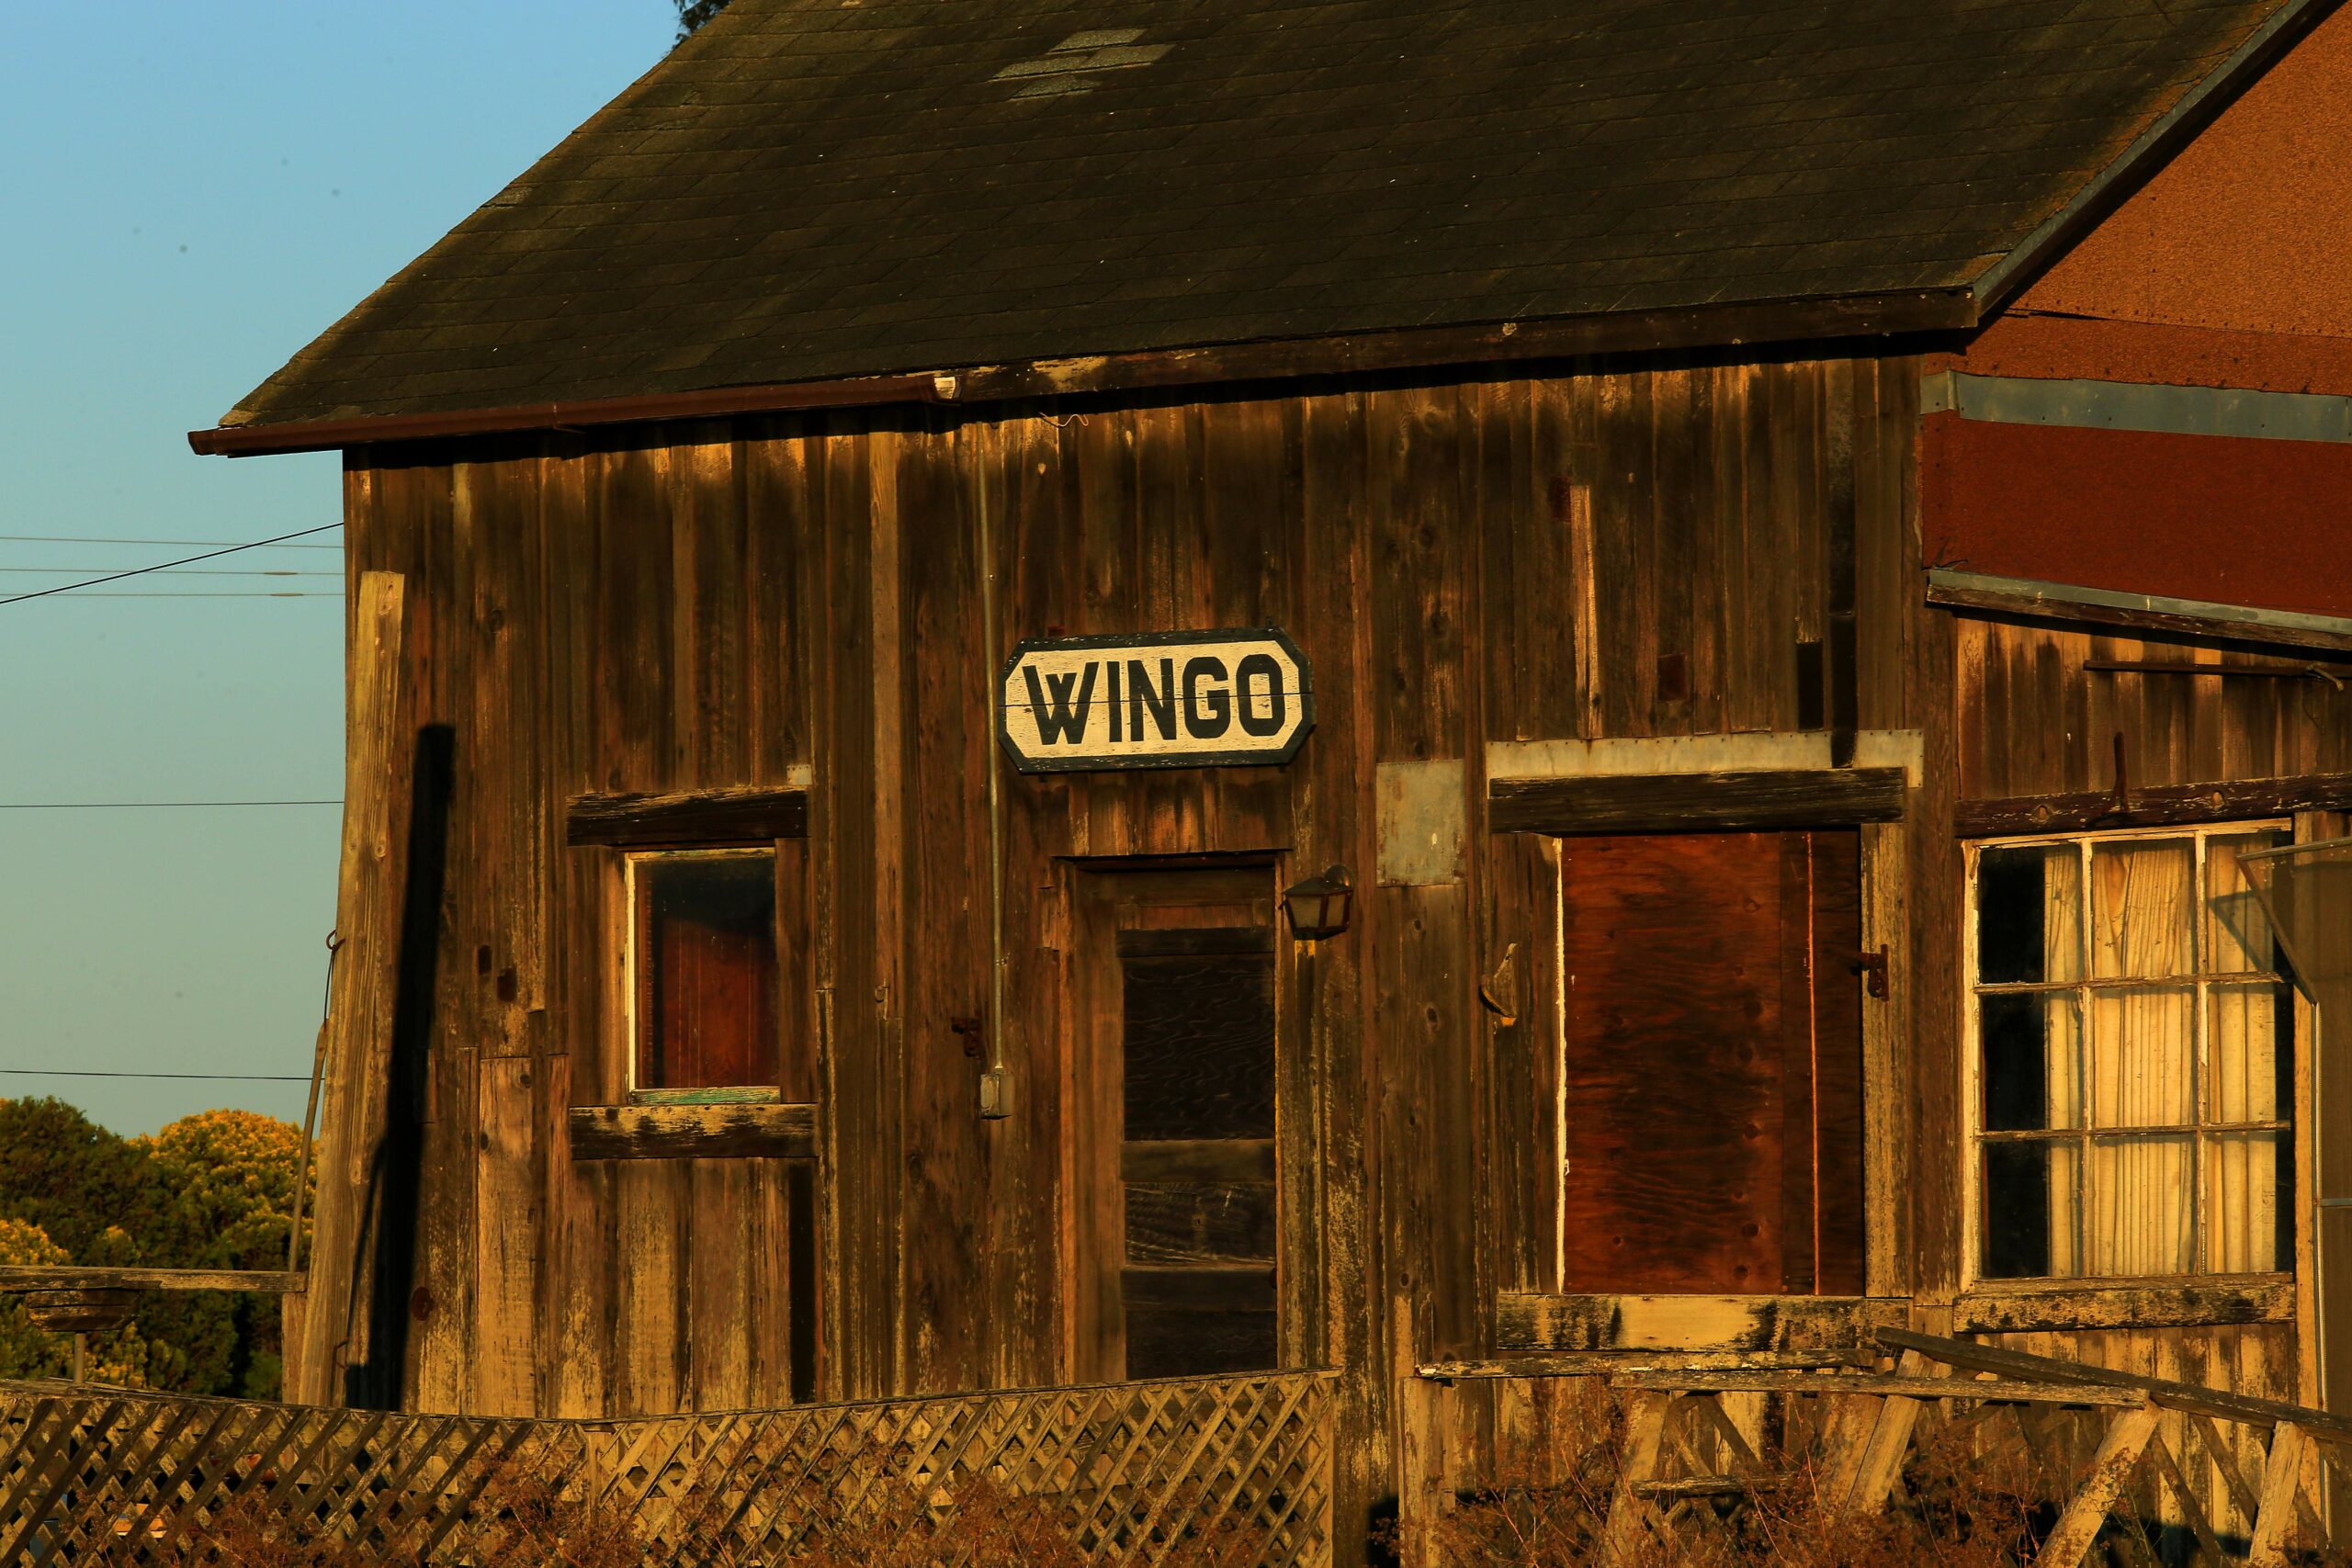 In the early 1900s, the railroad companies renamed the town Wingo. Some people say it's because of how windy it gets here. Sonoma County historian Arthur Dawson thinks it might have to do with all the winged migrating birds or the mosquitoes that once bred in the marshes before the land was cleared. (Photo by John Burgess/ The Press Democrat, 2015)